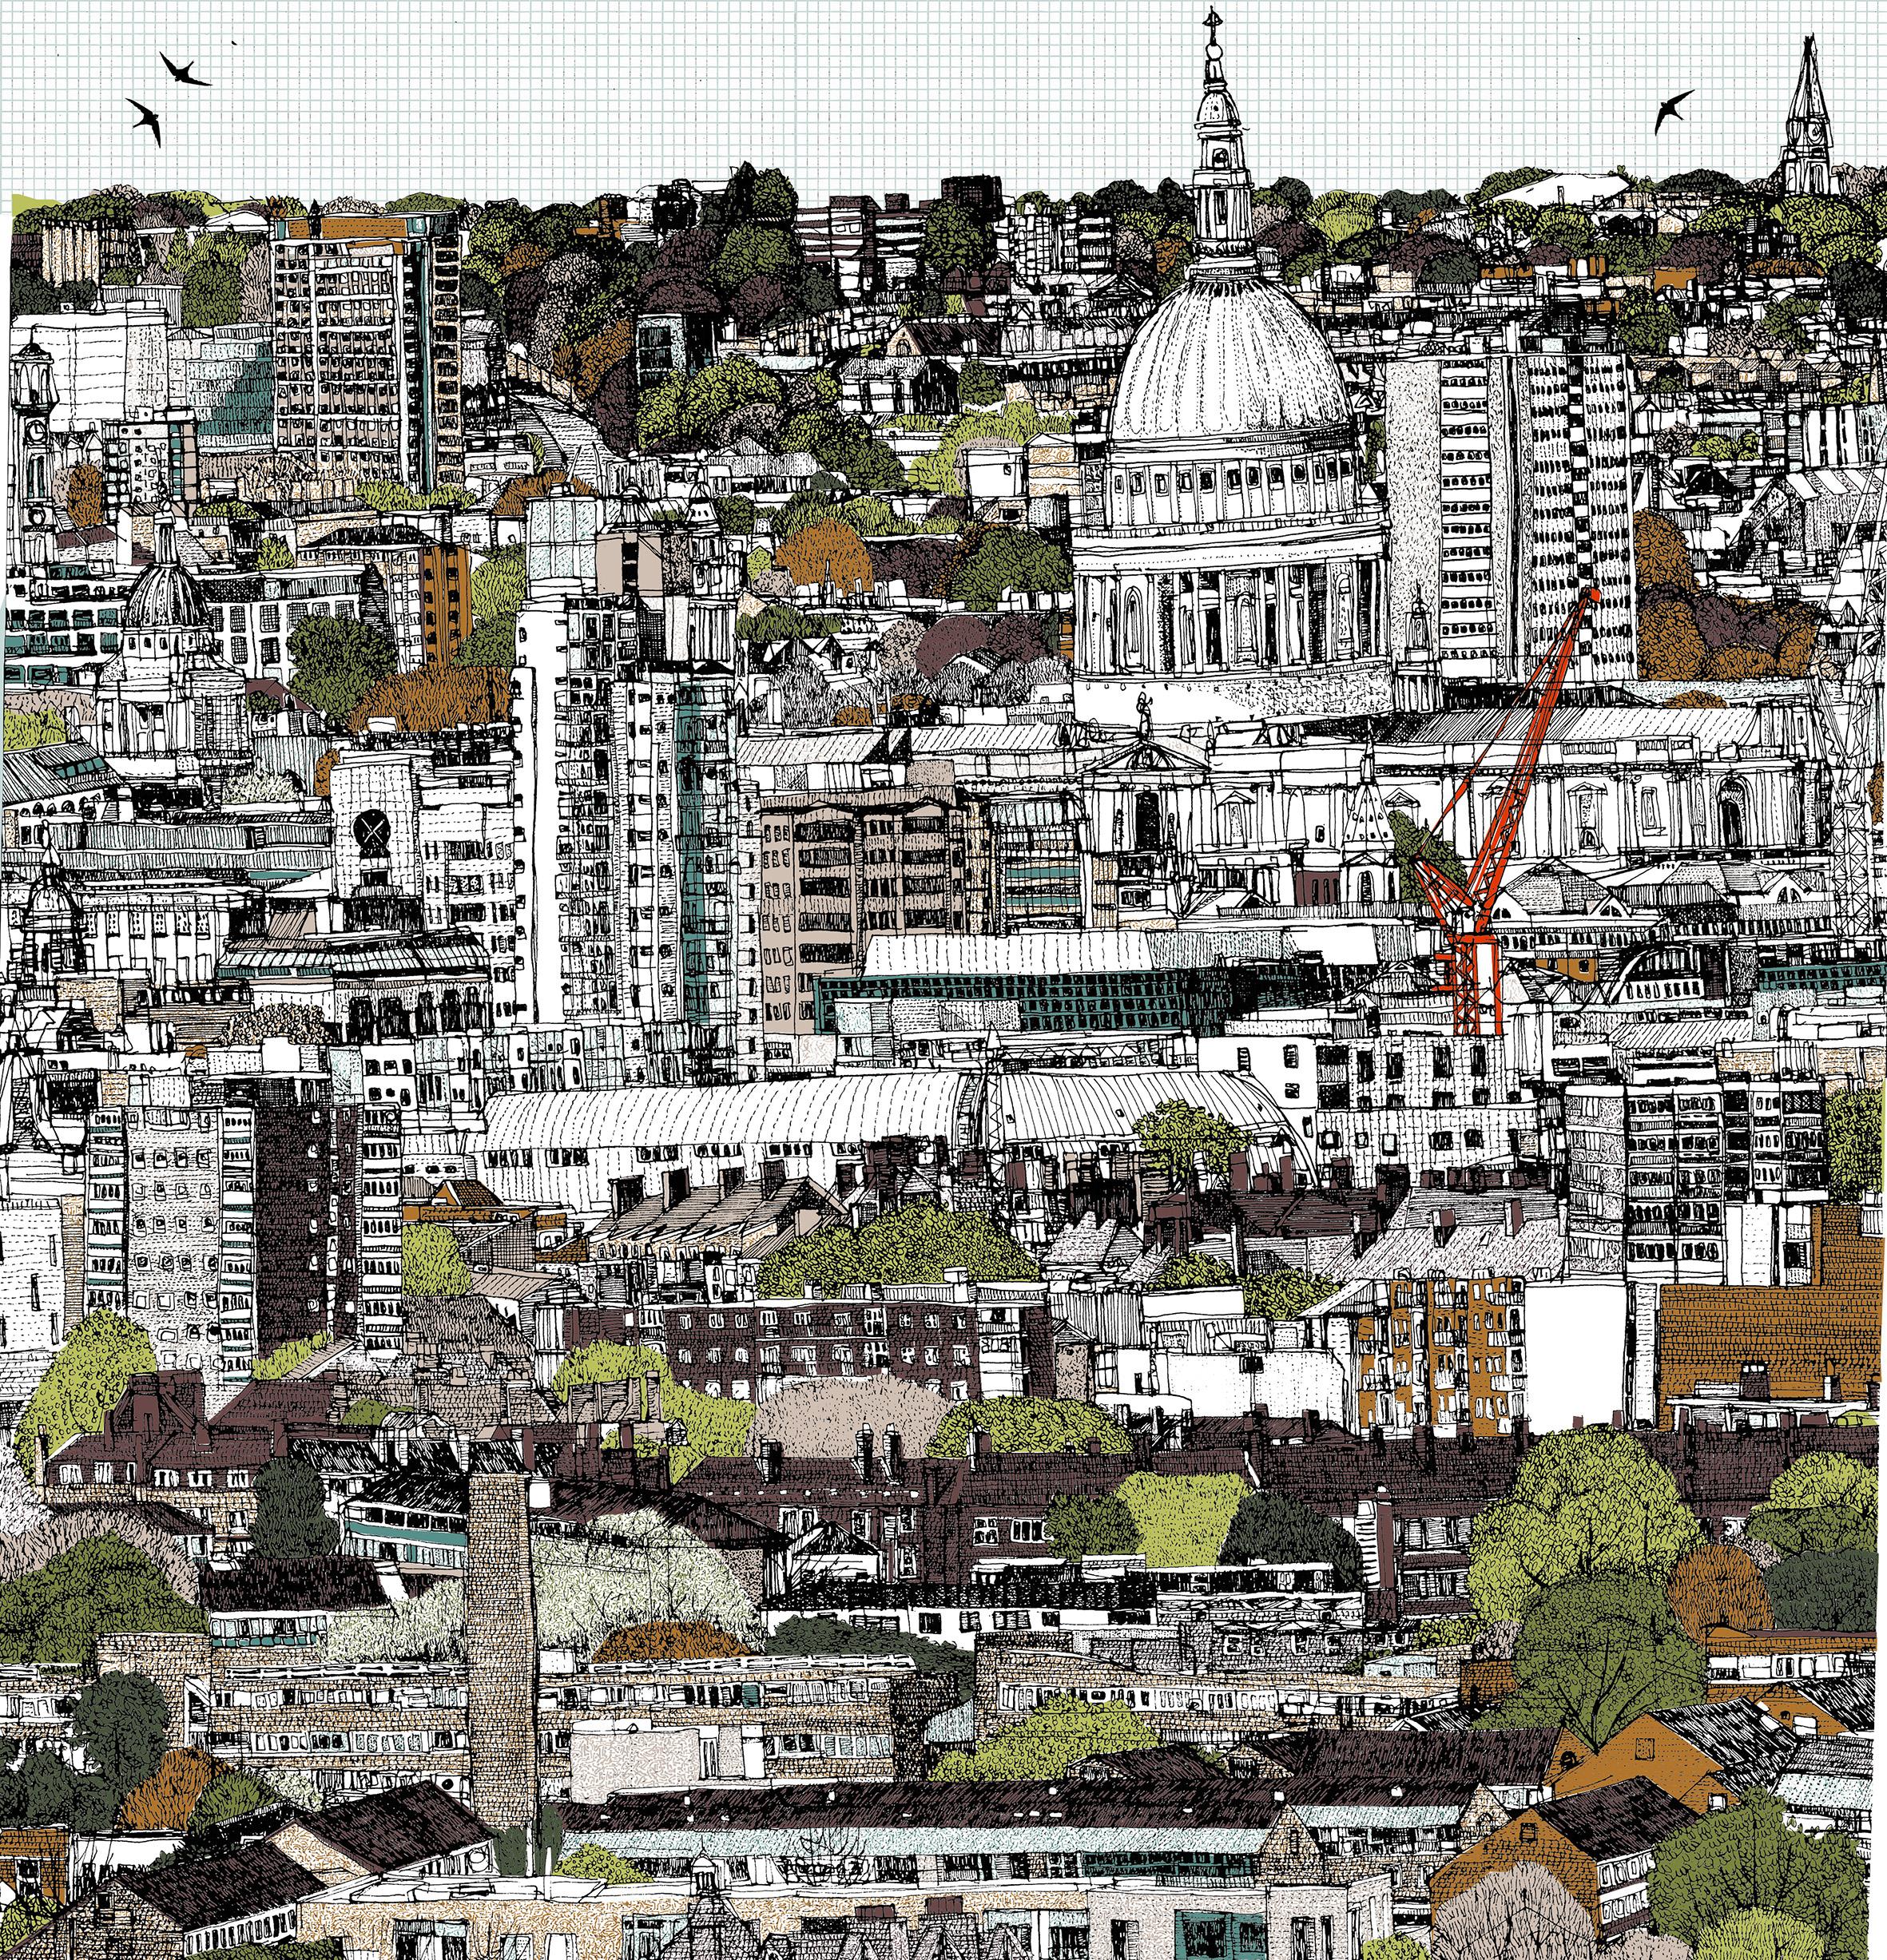 Clare Halifax
Changing Seasons at St Pauls
Limited Edition 10 Colour Screen Print
Edition of 100
Sheet Size: H 38cm x W 37cm x 0.1cm
Sold Unframed
Hand printed by the artist onto somerset satin paper 300gms with deckle edge.
Please Note that in situ